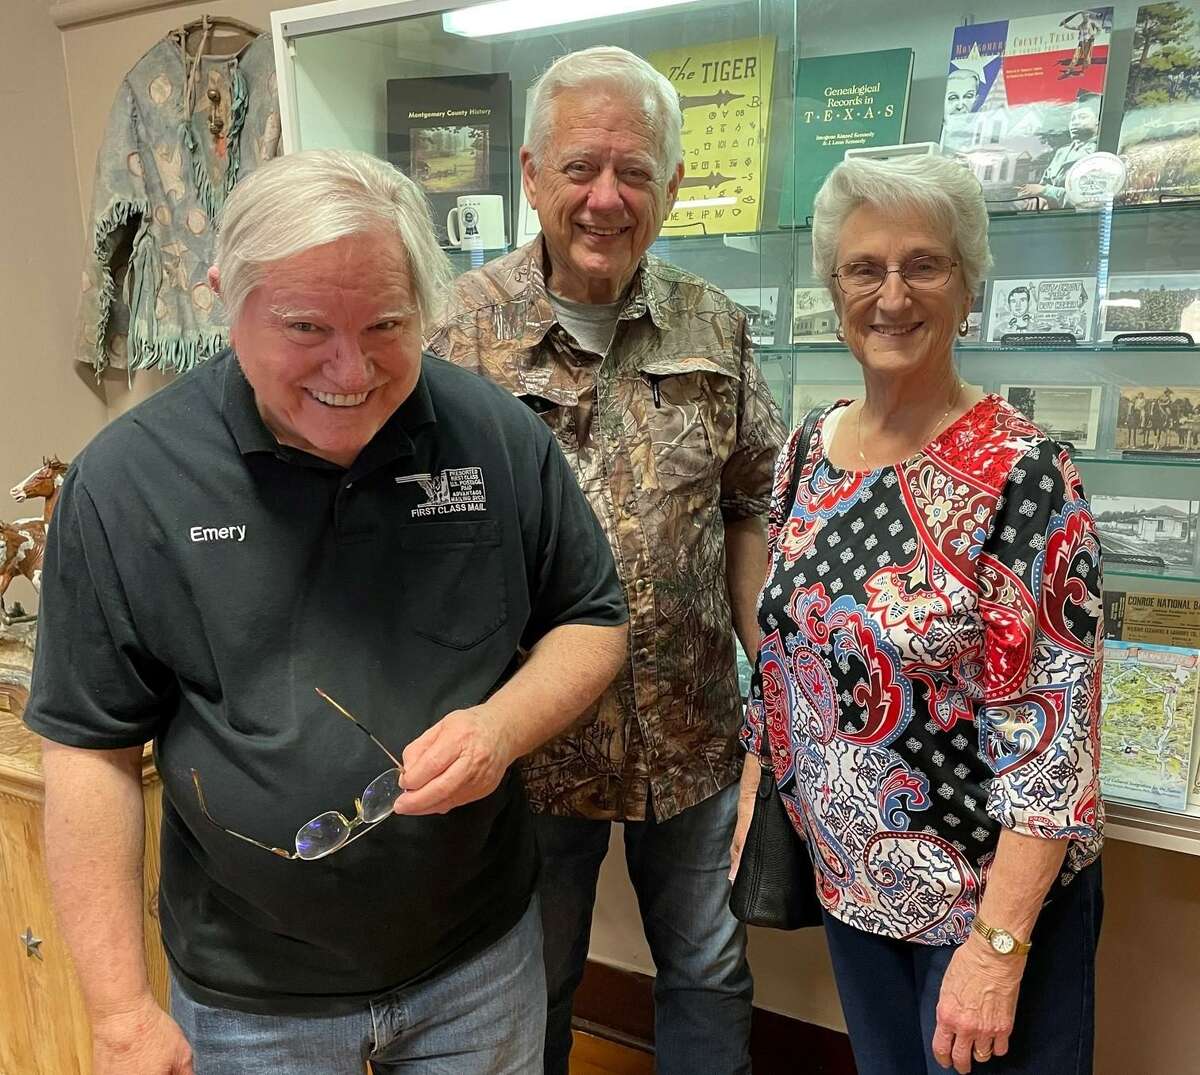 The Heritage Museum of Montgomery County recently debuted an exhibit of postcards featuring bygone Conroe landmarks. The display will be up through the end of summer. Pictured from left are Emery Heuermann, owner of the postcards, James Ray and Sue Hereford.